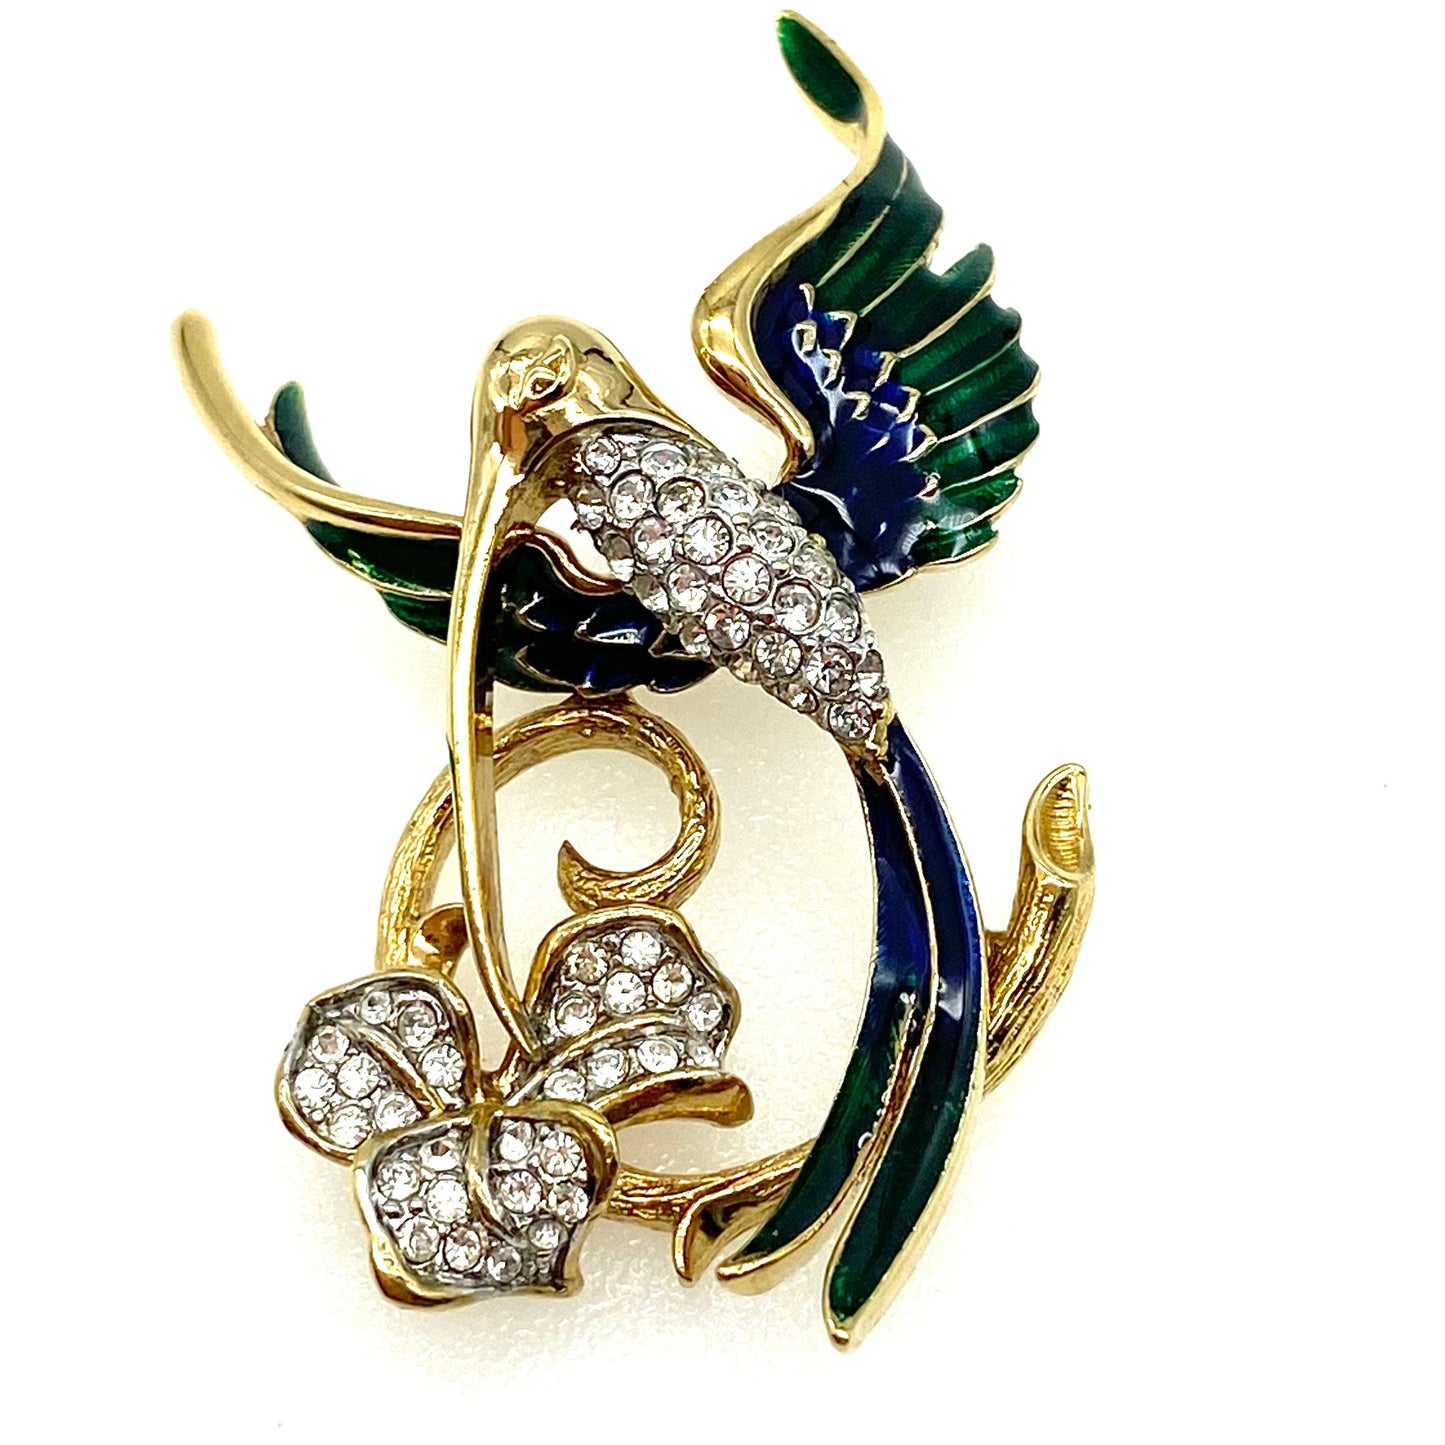 Attwood and Sawyer 22ct gold plated Hummingbird Brooch with Swarovski Crystals with an Attwood and Sawyer Box